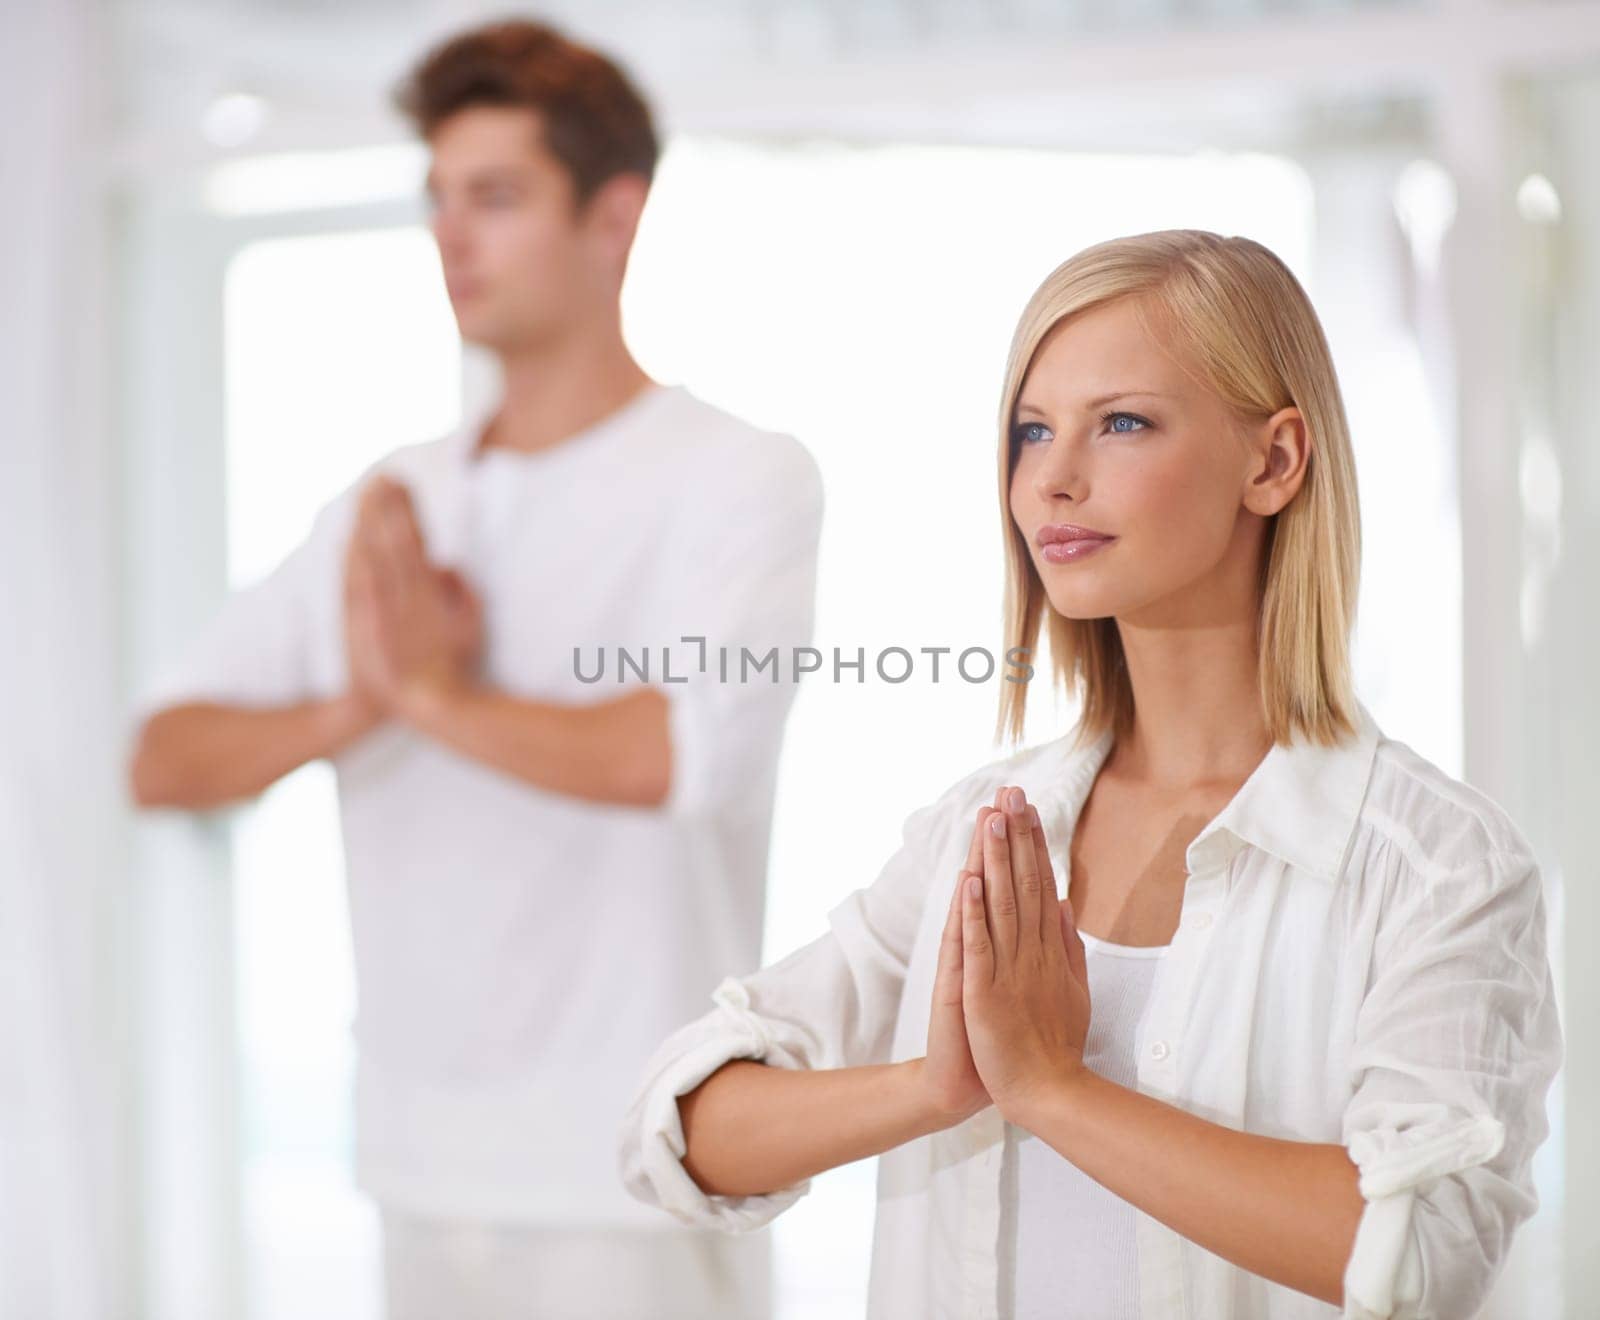 Meditation, prayer hands and people in a studio with peace, zen and mental health, wellness or balance. Mindfulness, relax and team with holistic, breathing or yoga exercise for spiritual awareness.